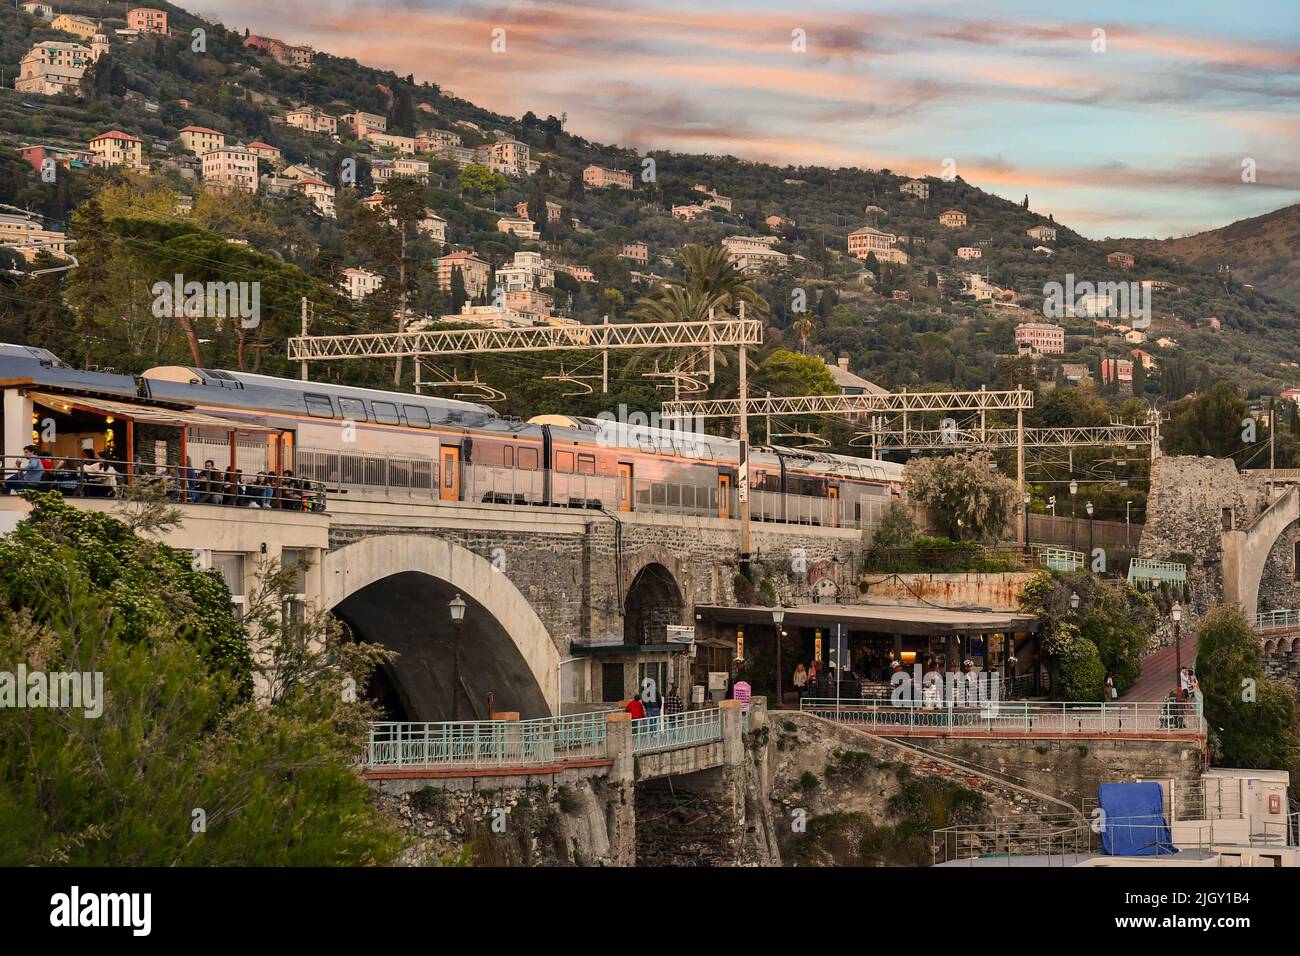 A stretch of the Anita Garibaldi Promenade with people at outdoor cafe and a train in the railway station at sunset, Nervi, Genoa, Liguria Stock Photo